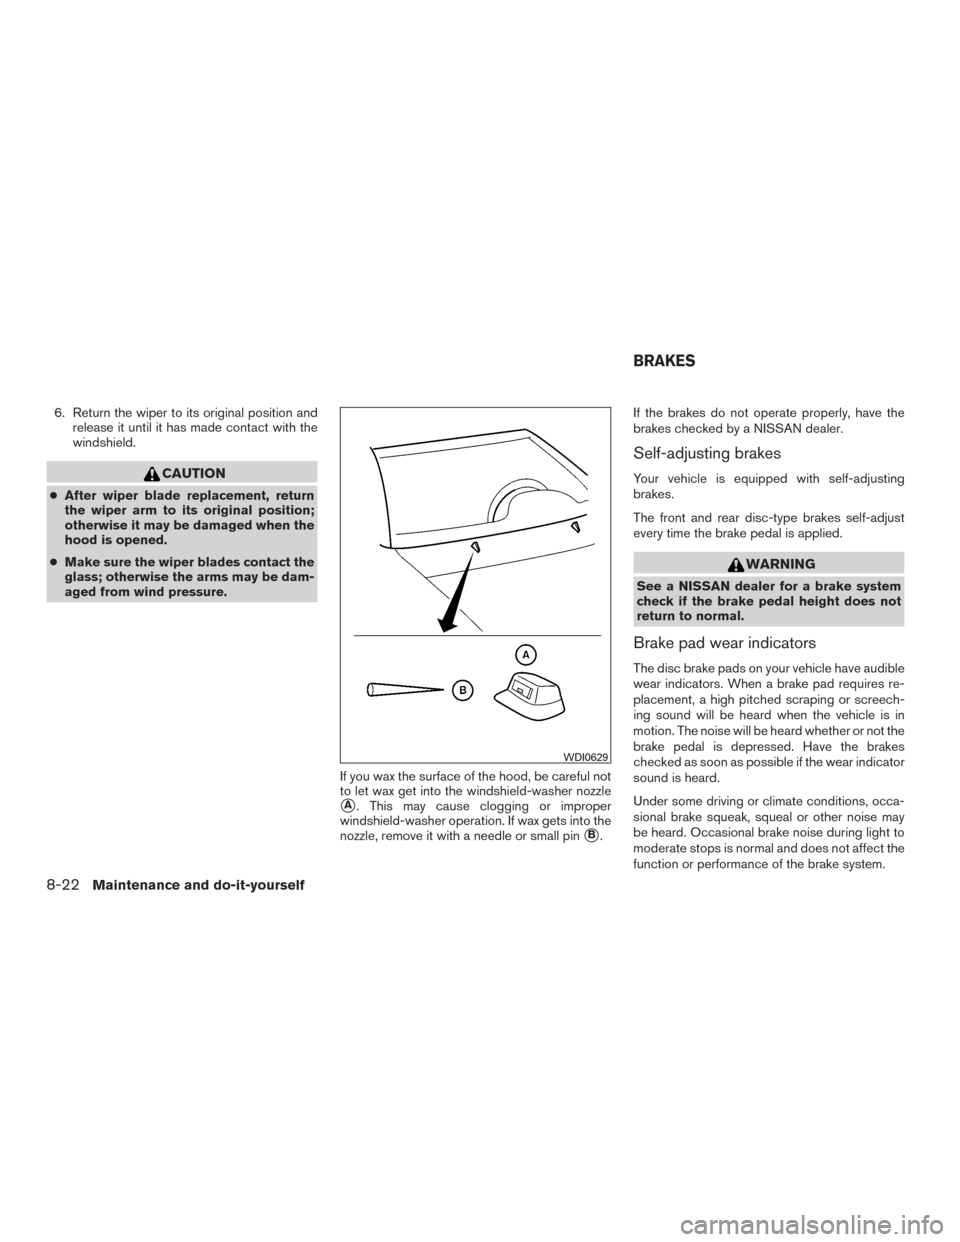 NISSAN TITAN 2015 1.G Owners Manual 6. Return the wiper to its original position andrelease it until it has made contact with the
windshield.
CAUTION
●After wiper blade replacement, return
the wiper arm to its original position;
other